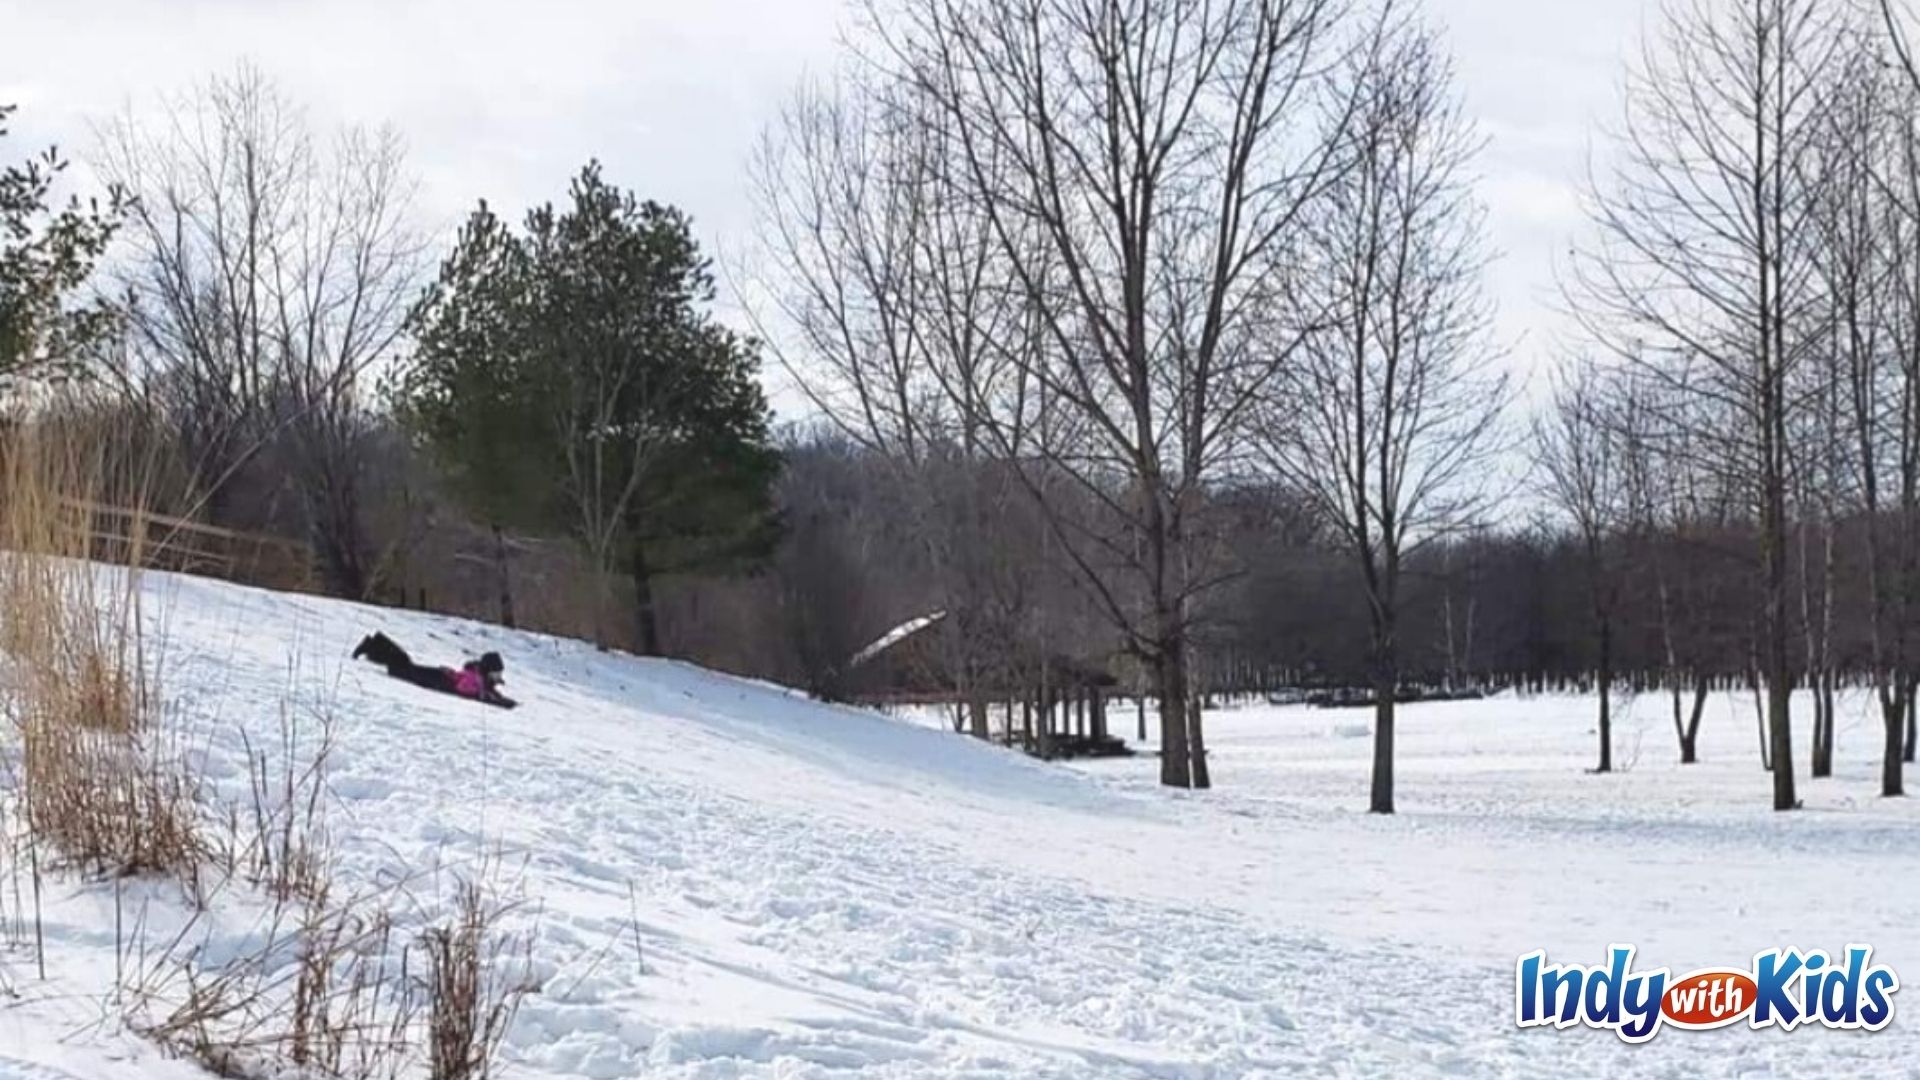 A child on a sled slides down a snowy hillside in Fort Harrison State Park.